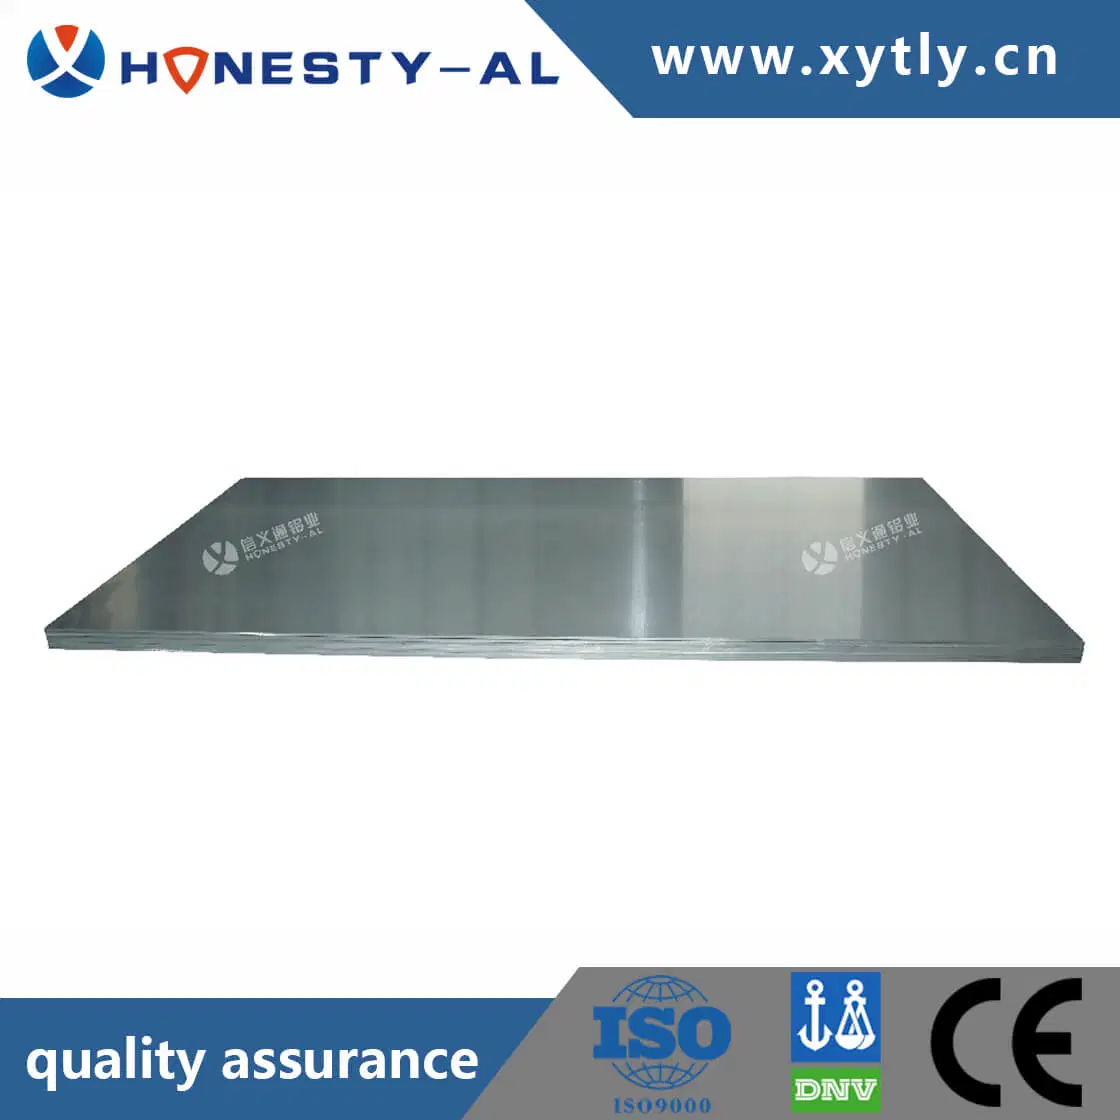 Honesty Aluminum High quality/High cost performance  3003 3004 4mm 5mm 10mm 20mm Thickness Aluminium Plate Sheet Chinese Supplier for Billboards Kitchen Utensils Cookware Food Packing